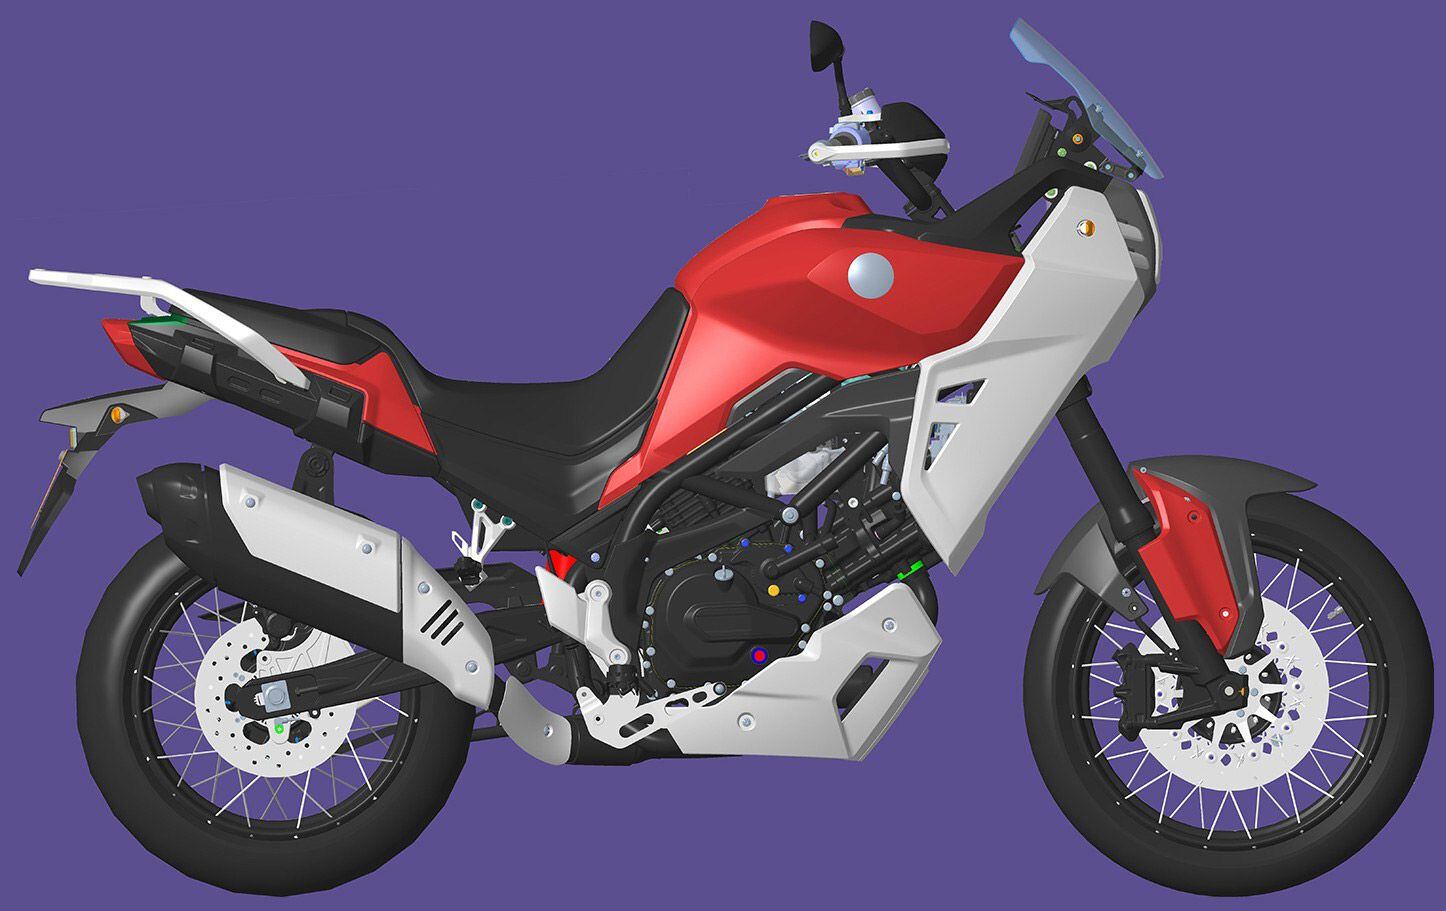 Adventure cues aside, the bike looks to be more road oriented, with 19-inch front and 17 rear wheels.